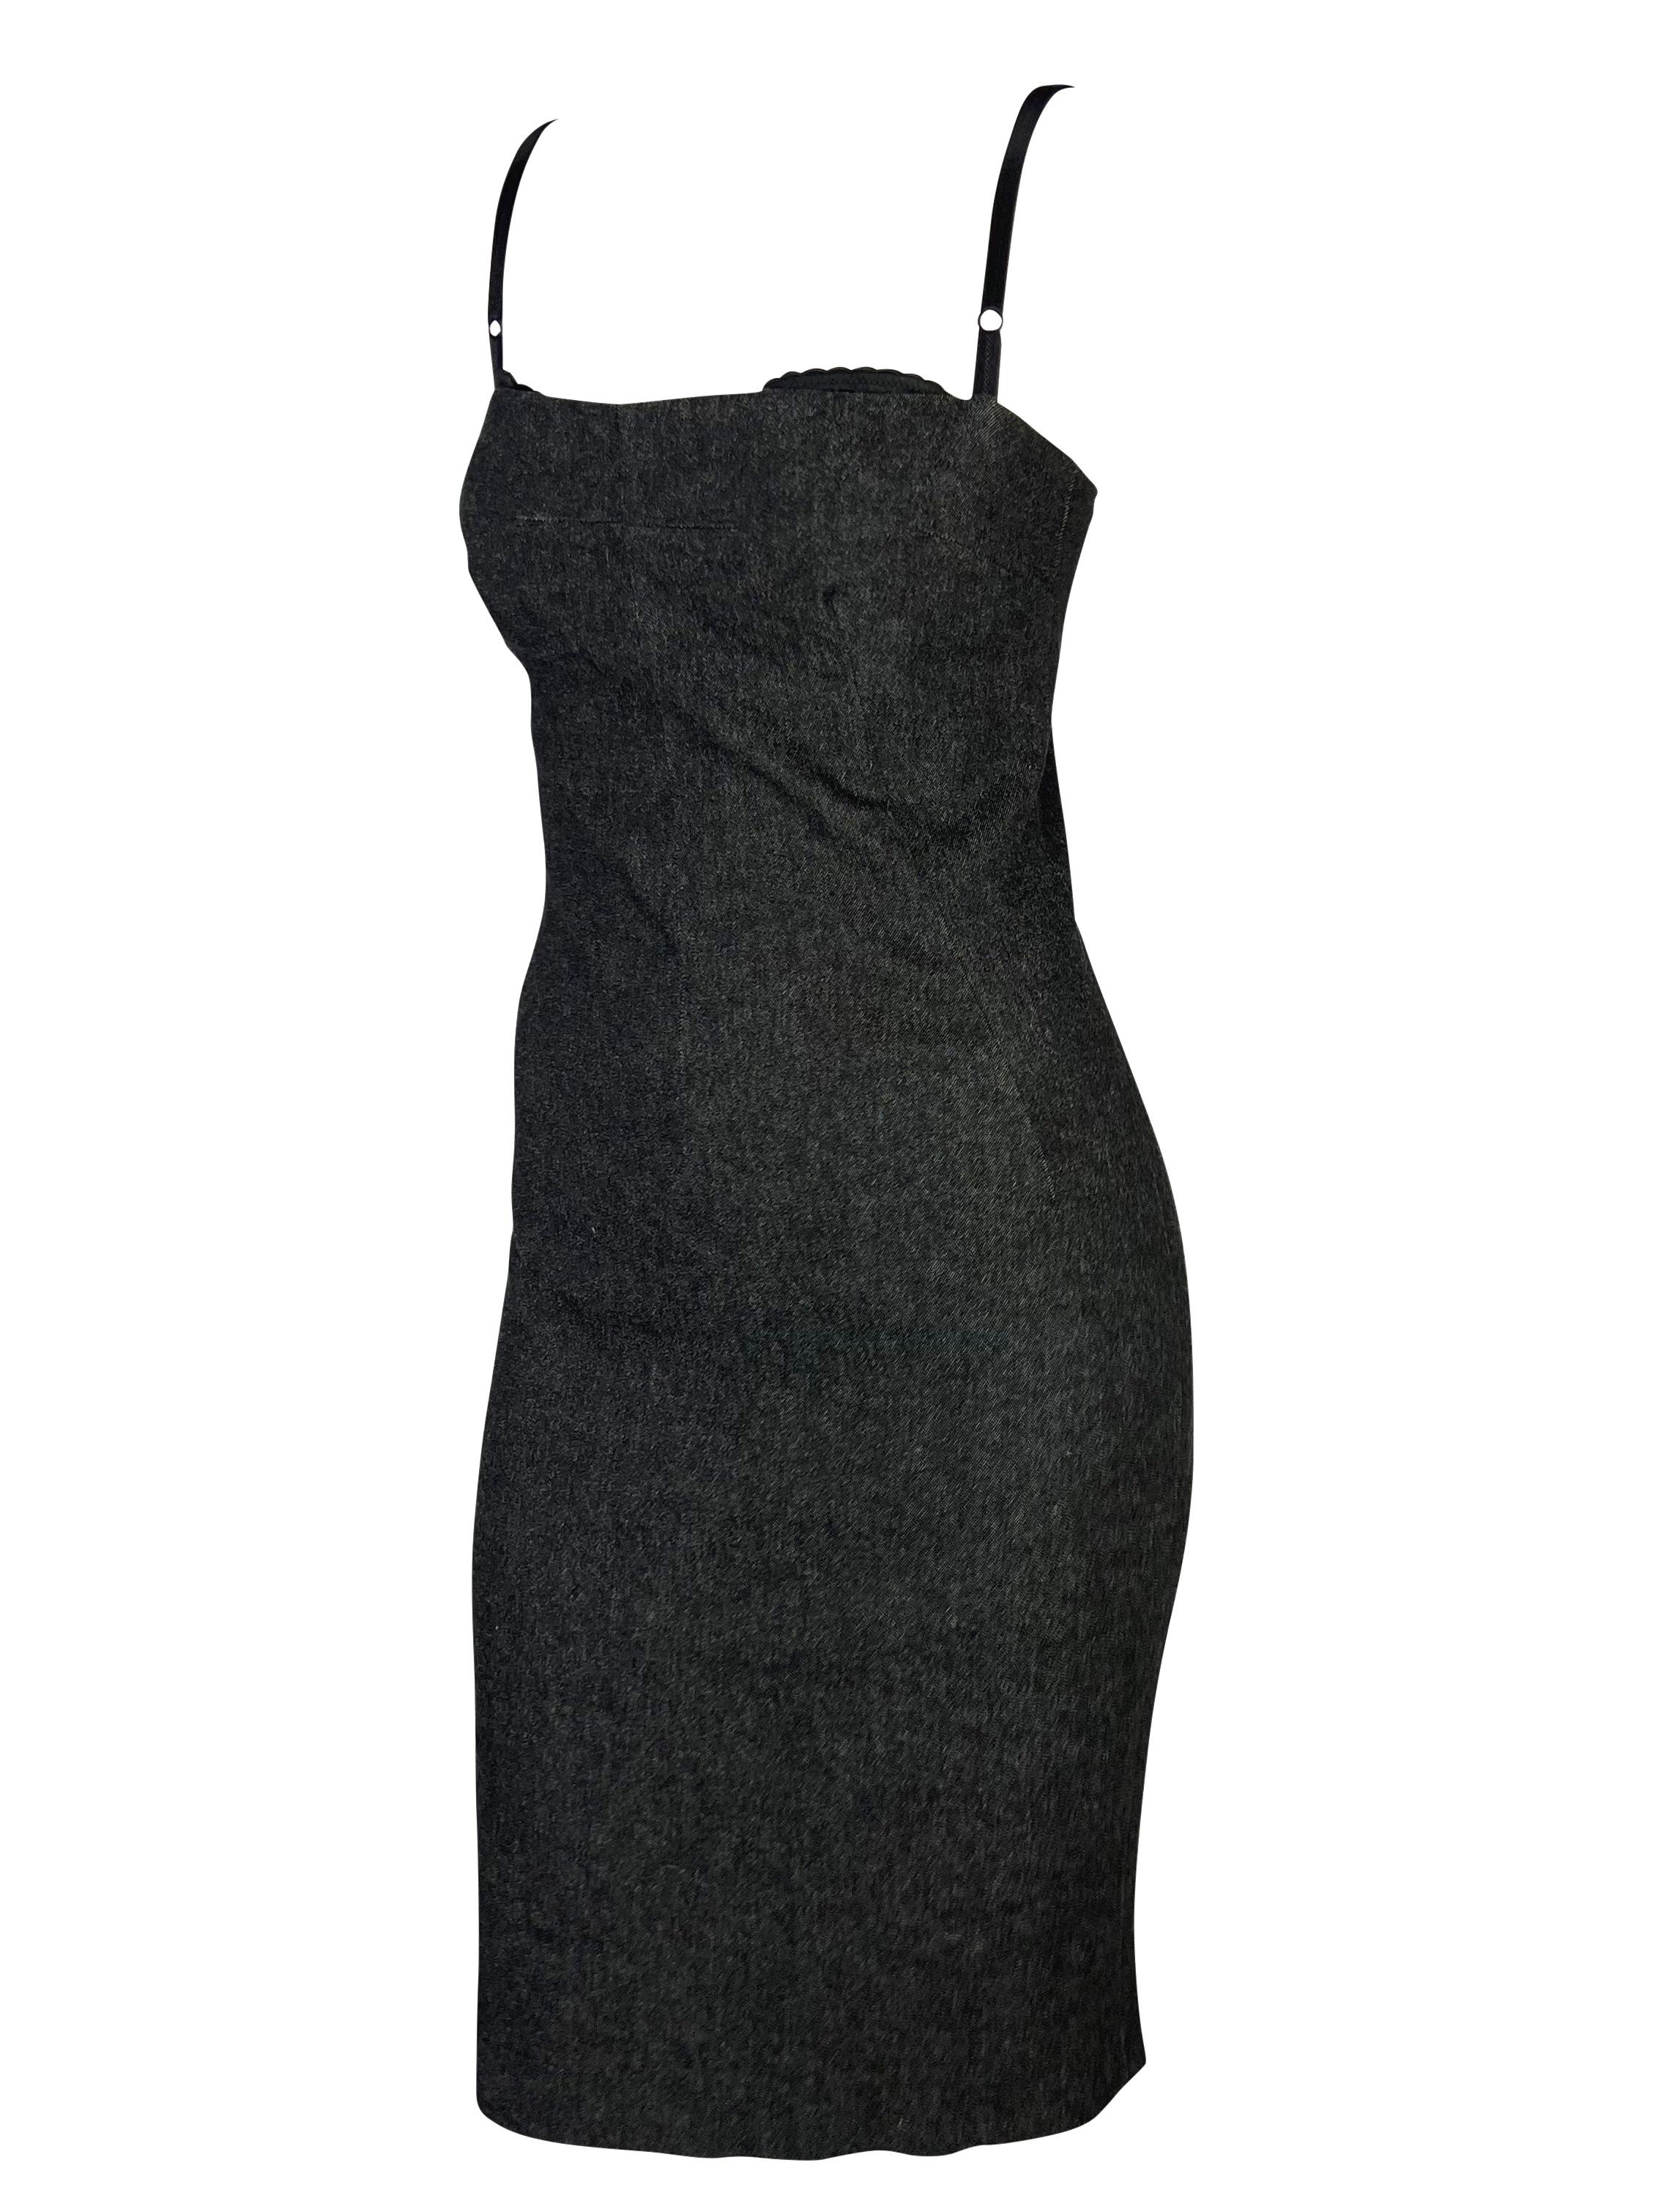 Presenting a beautiful dark denim bodycon Dolce and Gabbana pin-up dress. From the late 90s / early 2000s, this gorgeous dress is constructed of dark faux denim and features a square neckline. The dress has an internal lace bra sewn in that